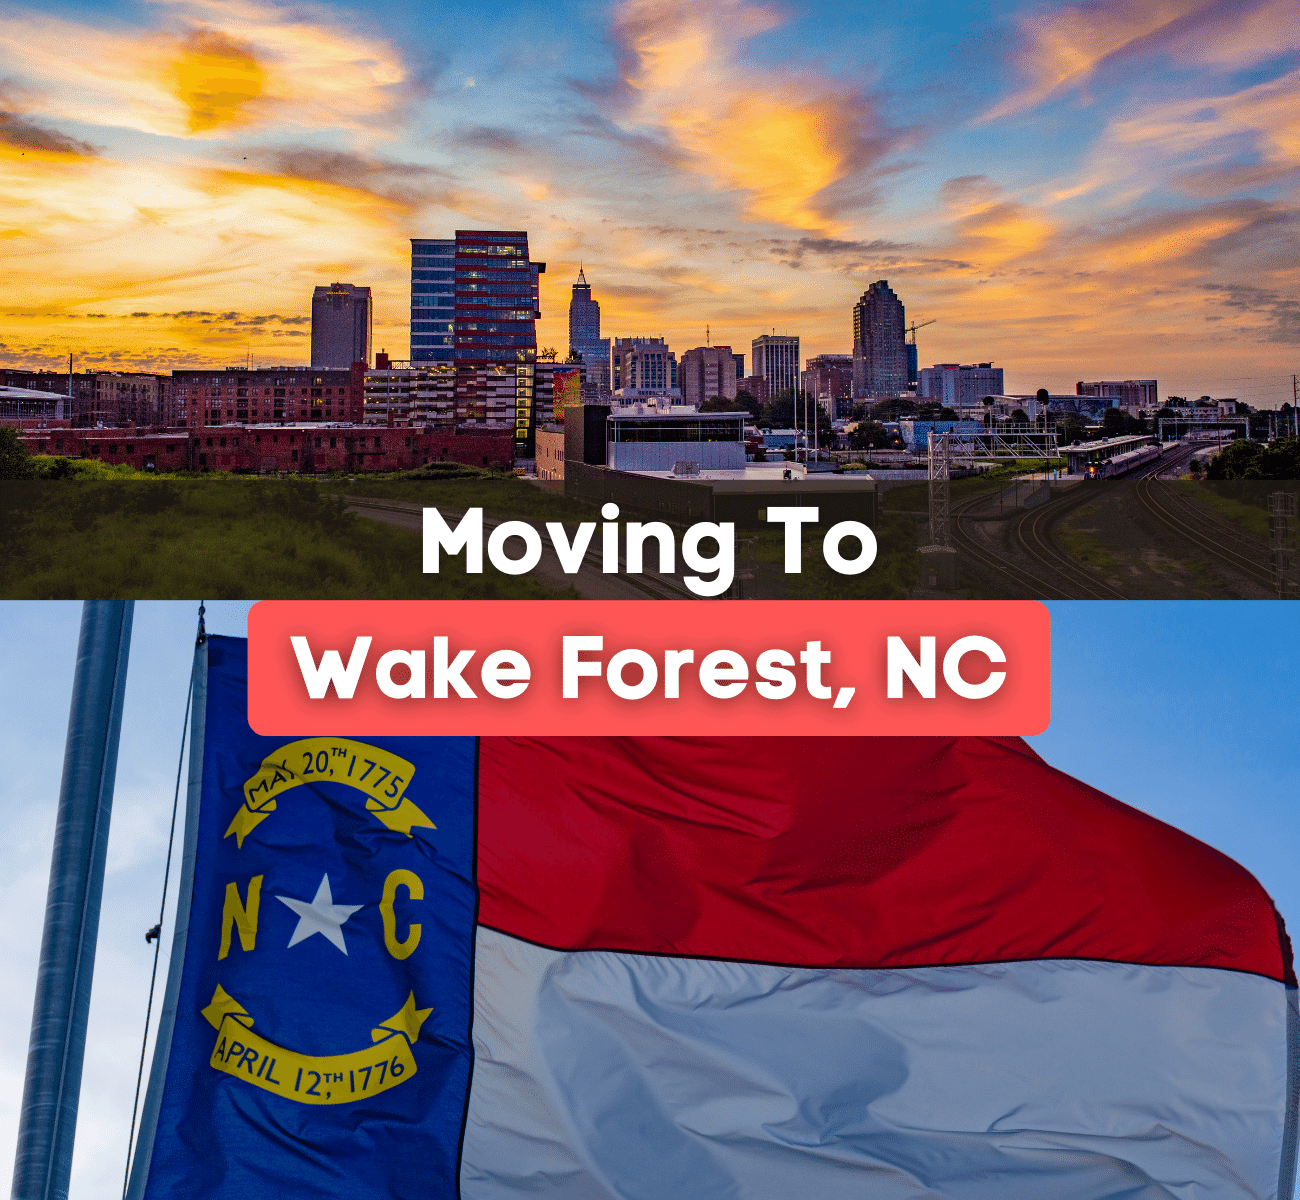 Moving to Wake Forest, NC - What is it like living in the city of Wake Forest North Carolina?